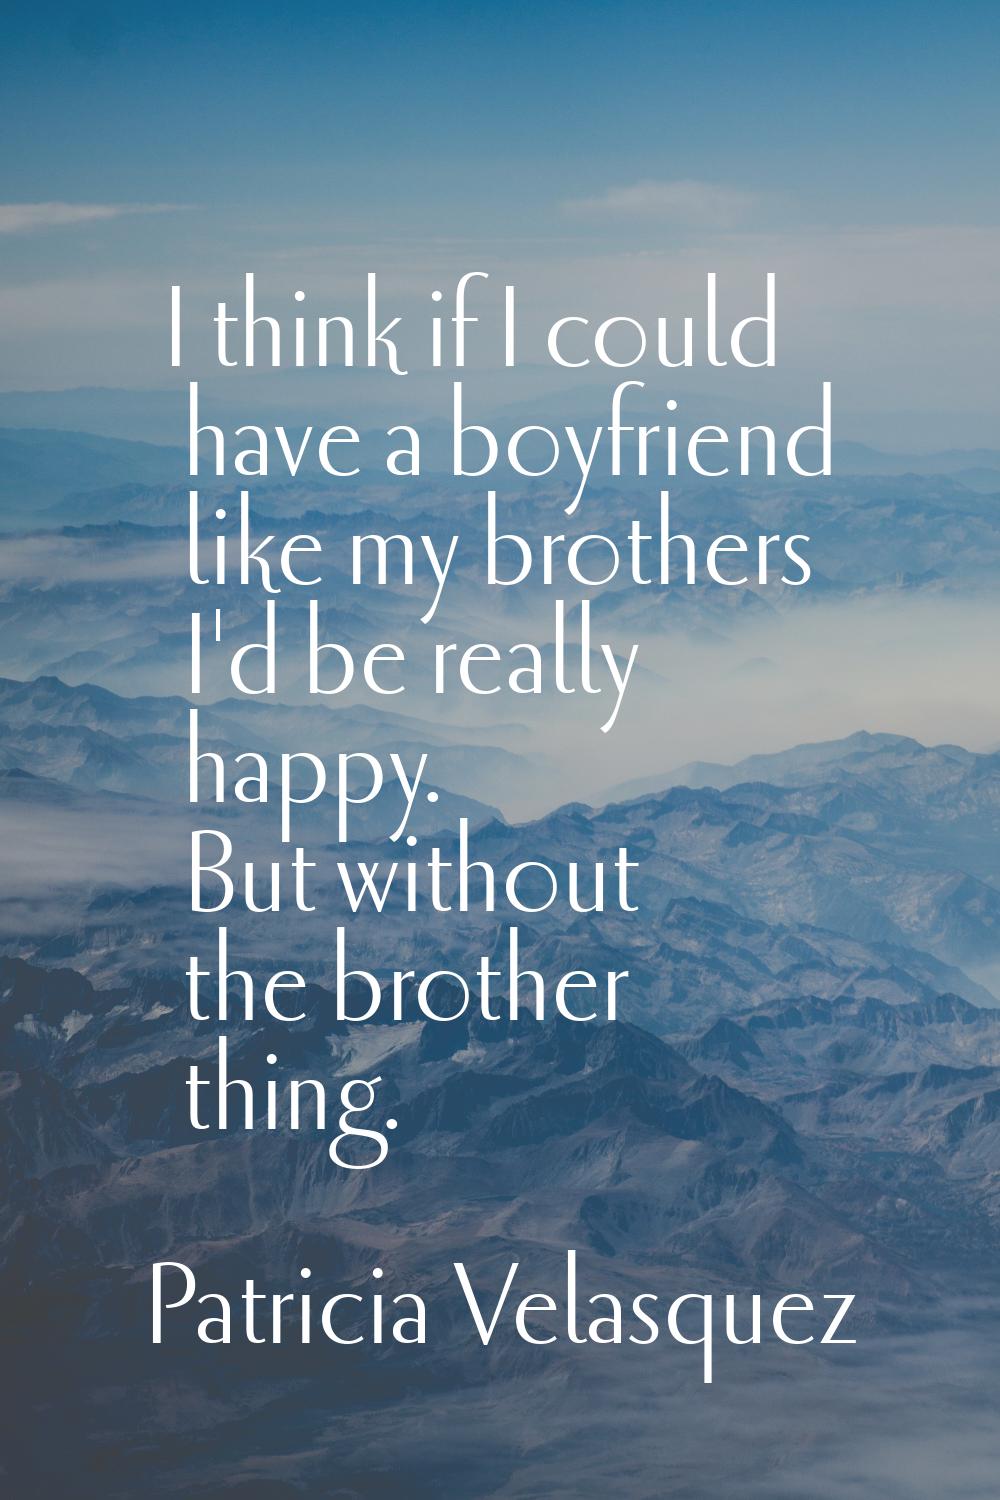 I think if I could have a boyfriend like my brothers I'd be really happy. But without the brother t